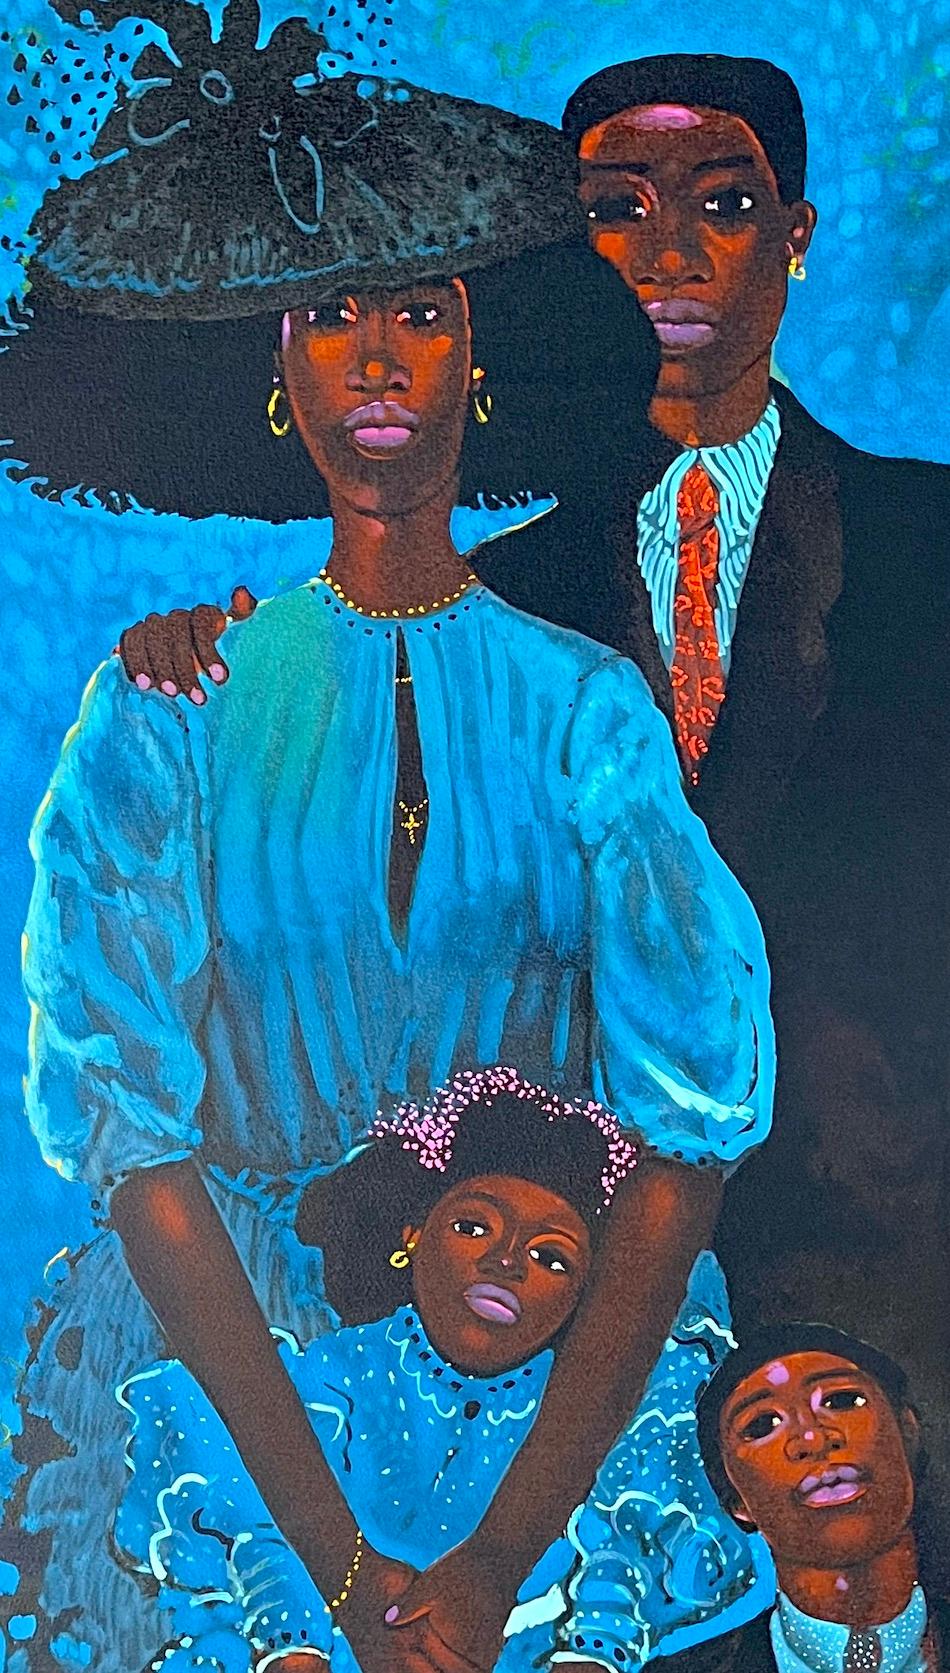 FAMILY IN BLUE Signed Lithograph, Black Family Portrait, Azure Blue, Warm Brown - Print by Geoffrey Holder